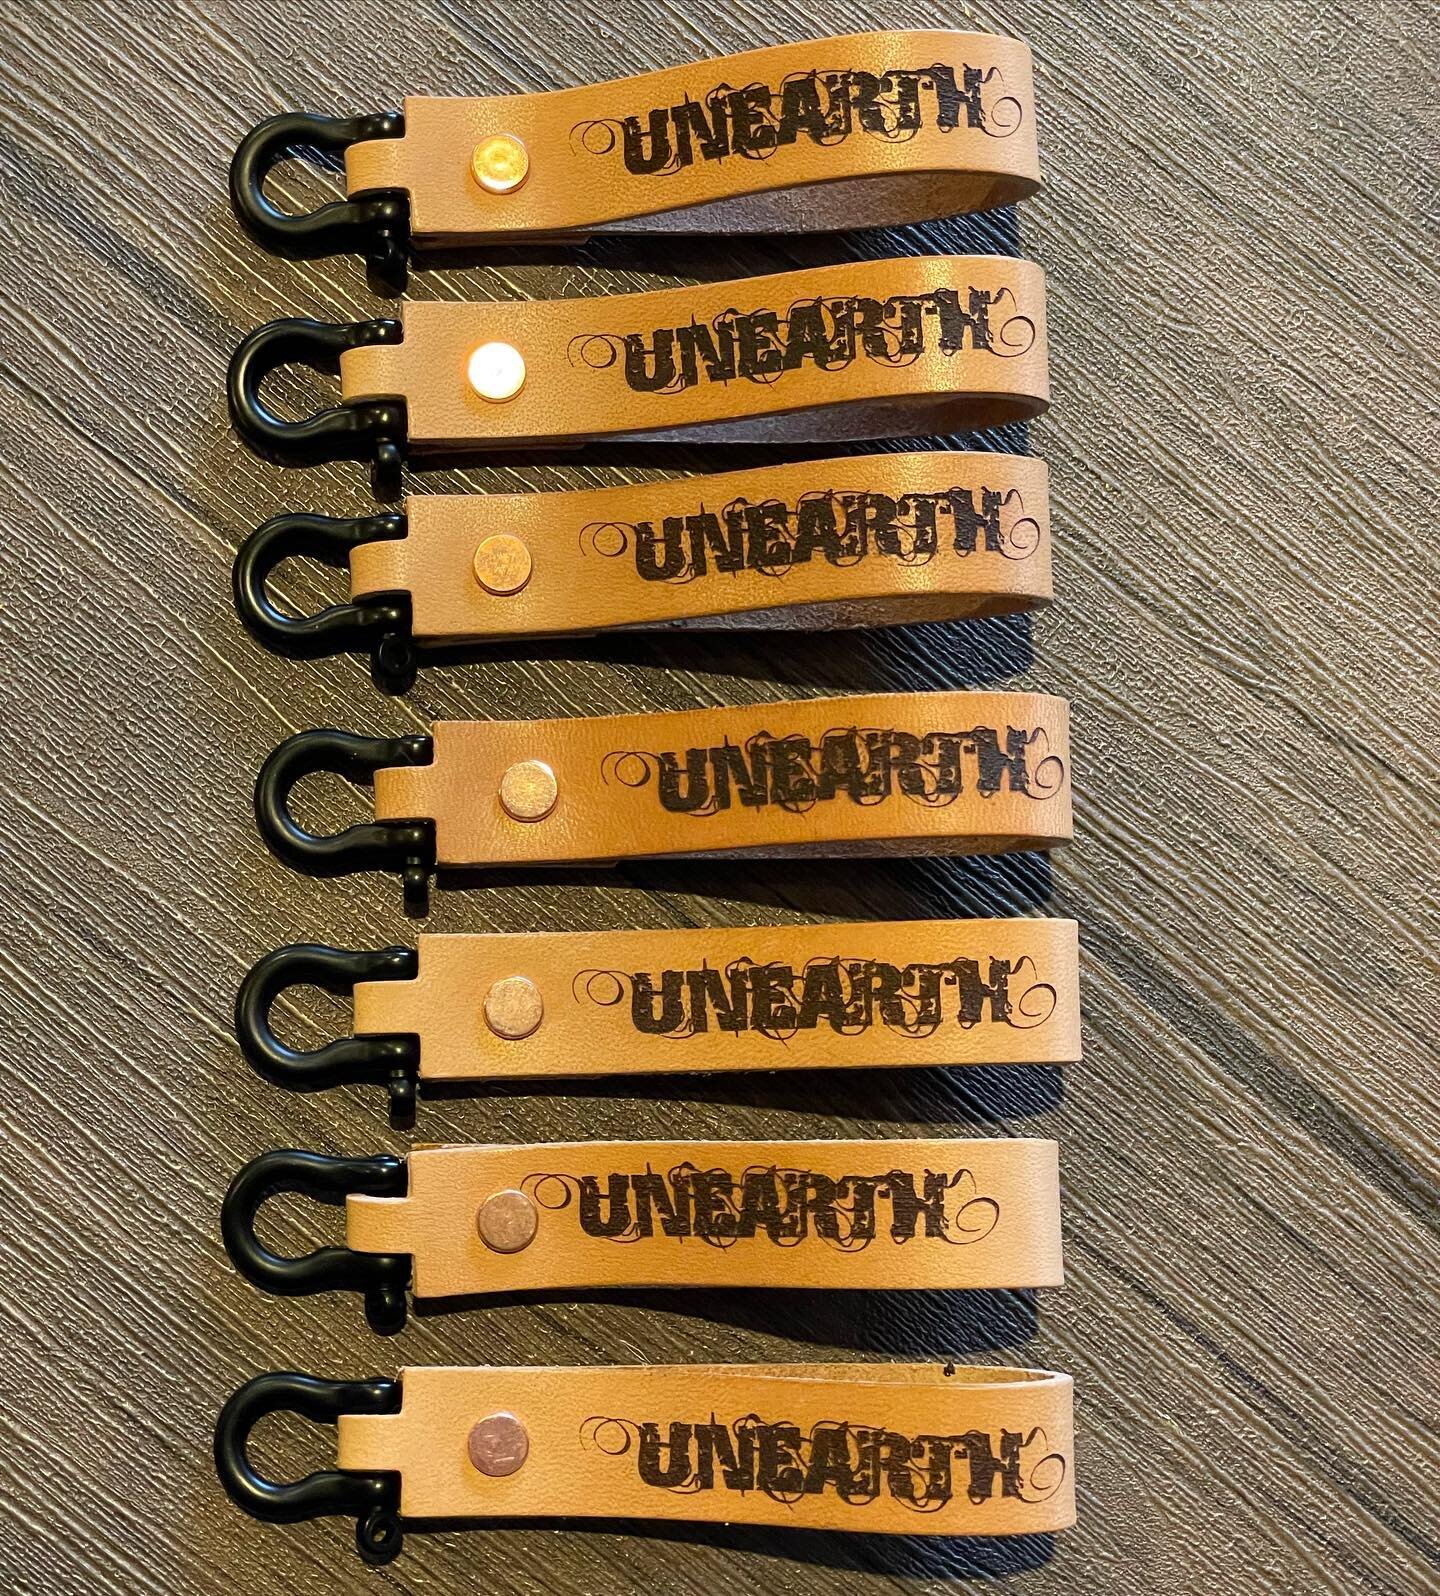 keychains for the @unearthofficial dudes.